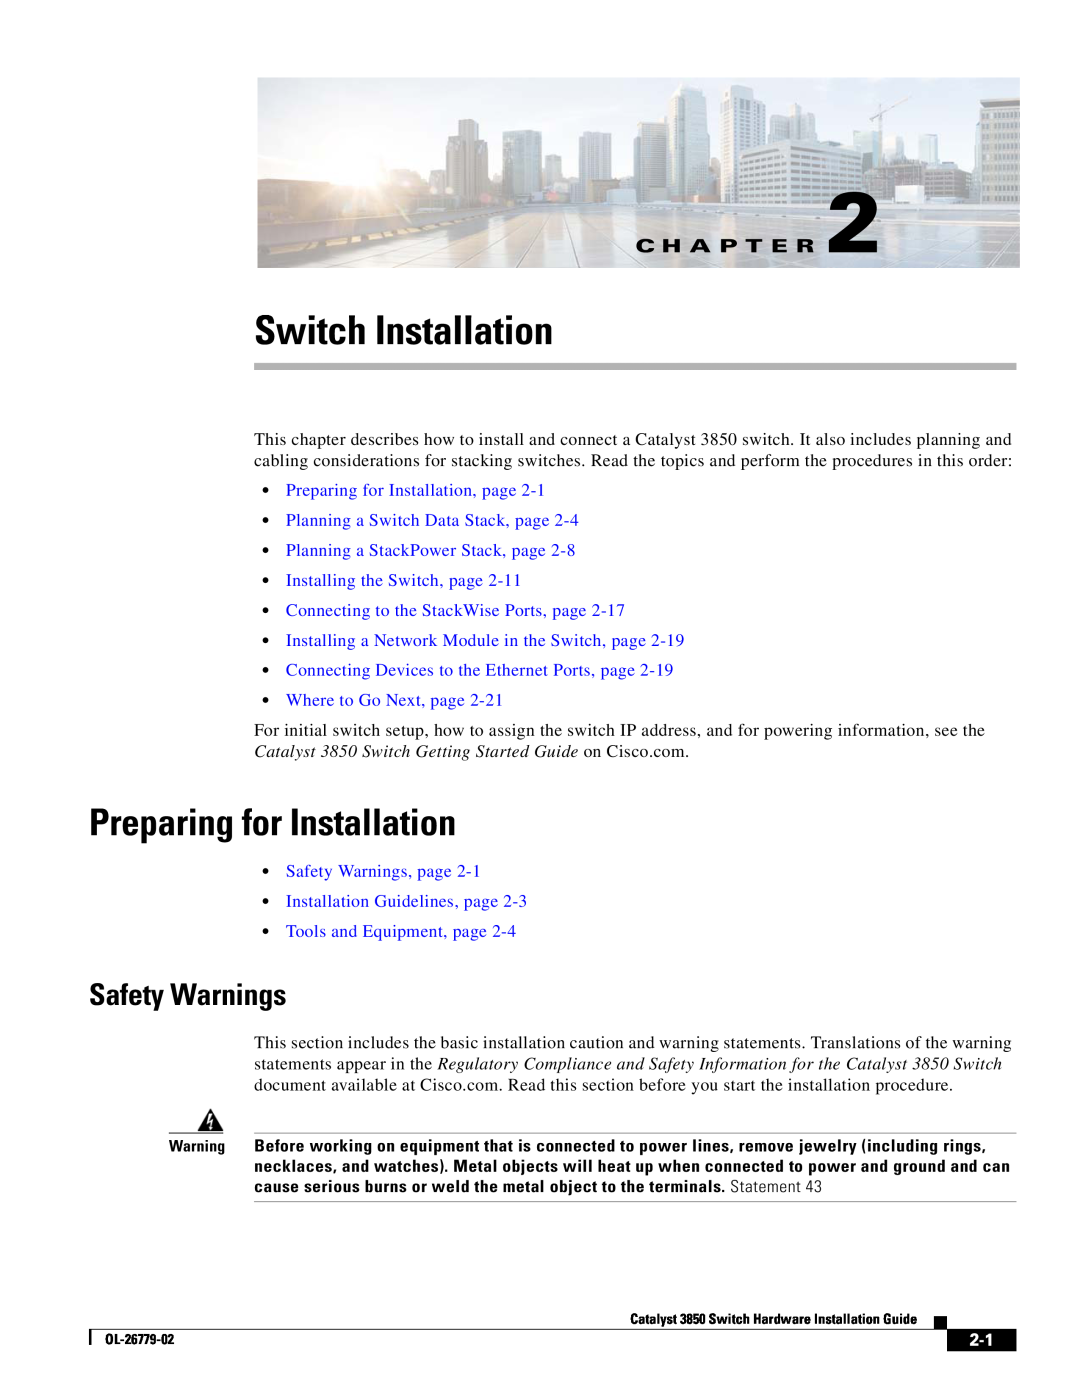 Cisco Systems C3850NM41G manual Switch Installation, Preparing for Installation, Safety Warnings, Tools and Equipment, page 